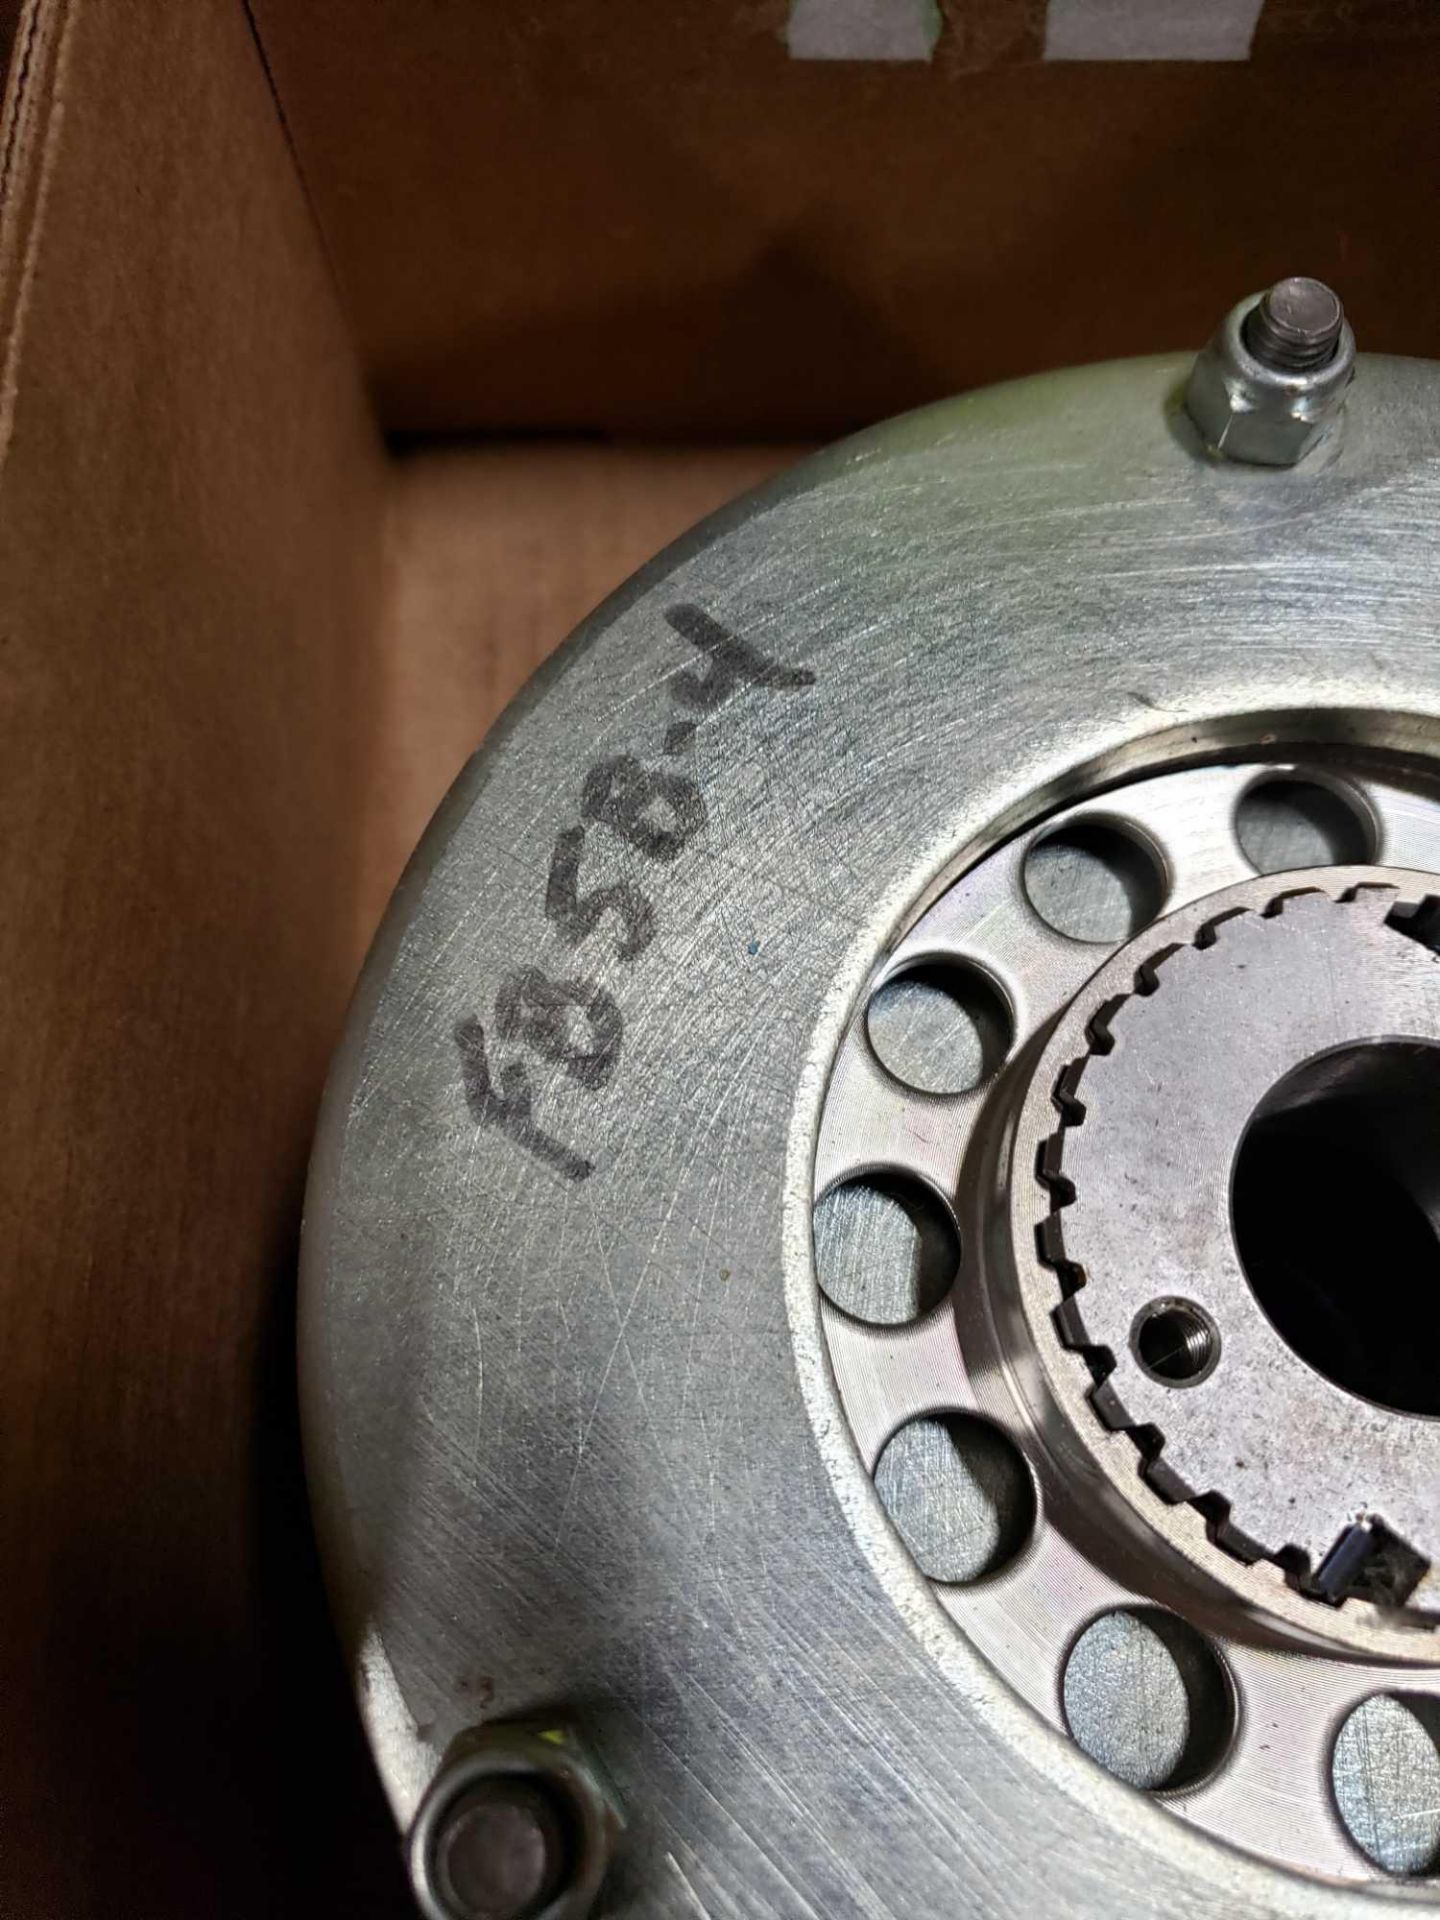 FB5B-4 clutch brake. Appears unused as pictured. - Image 2 of 3